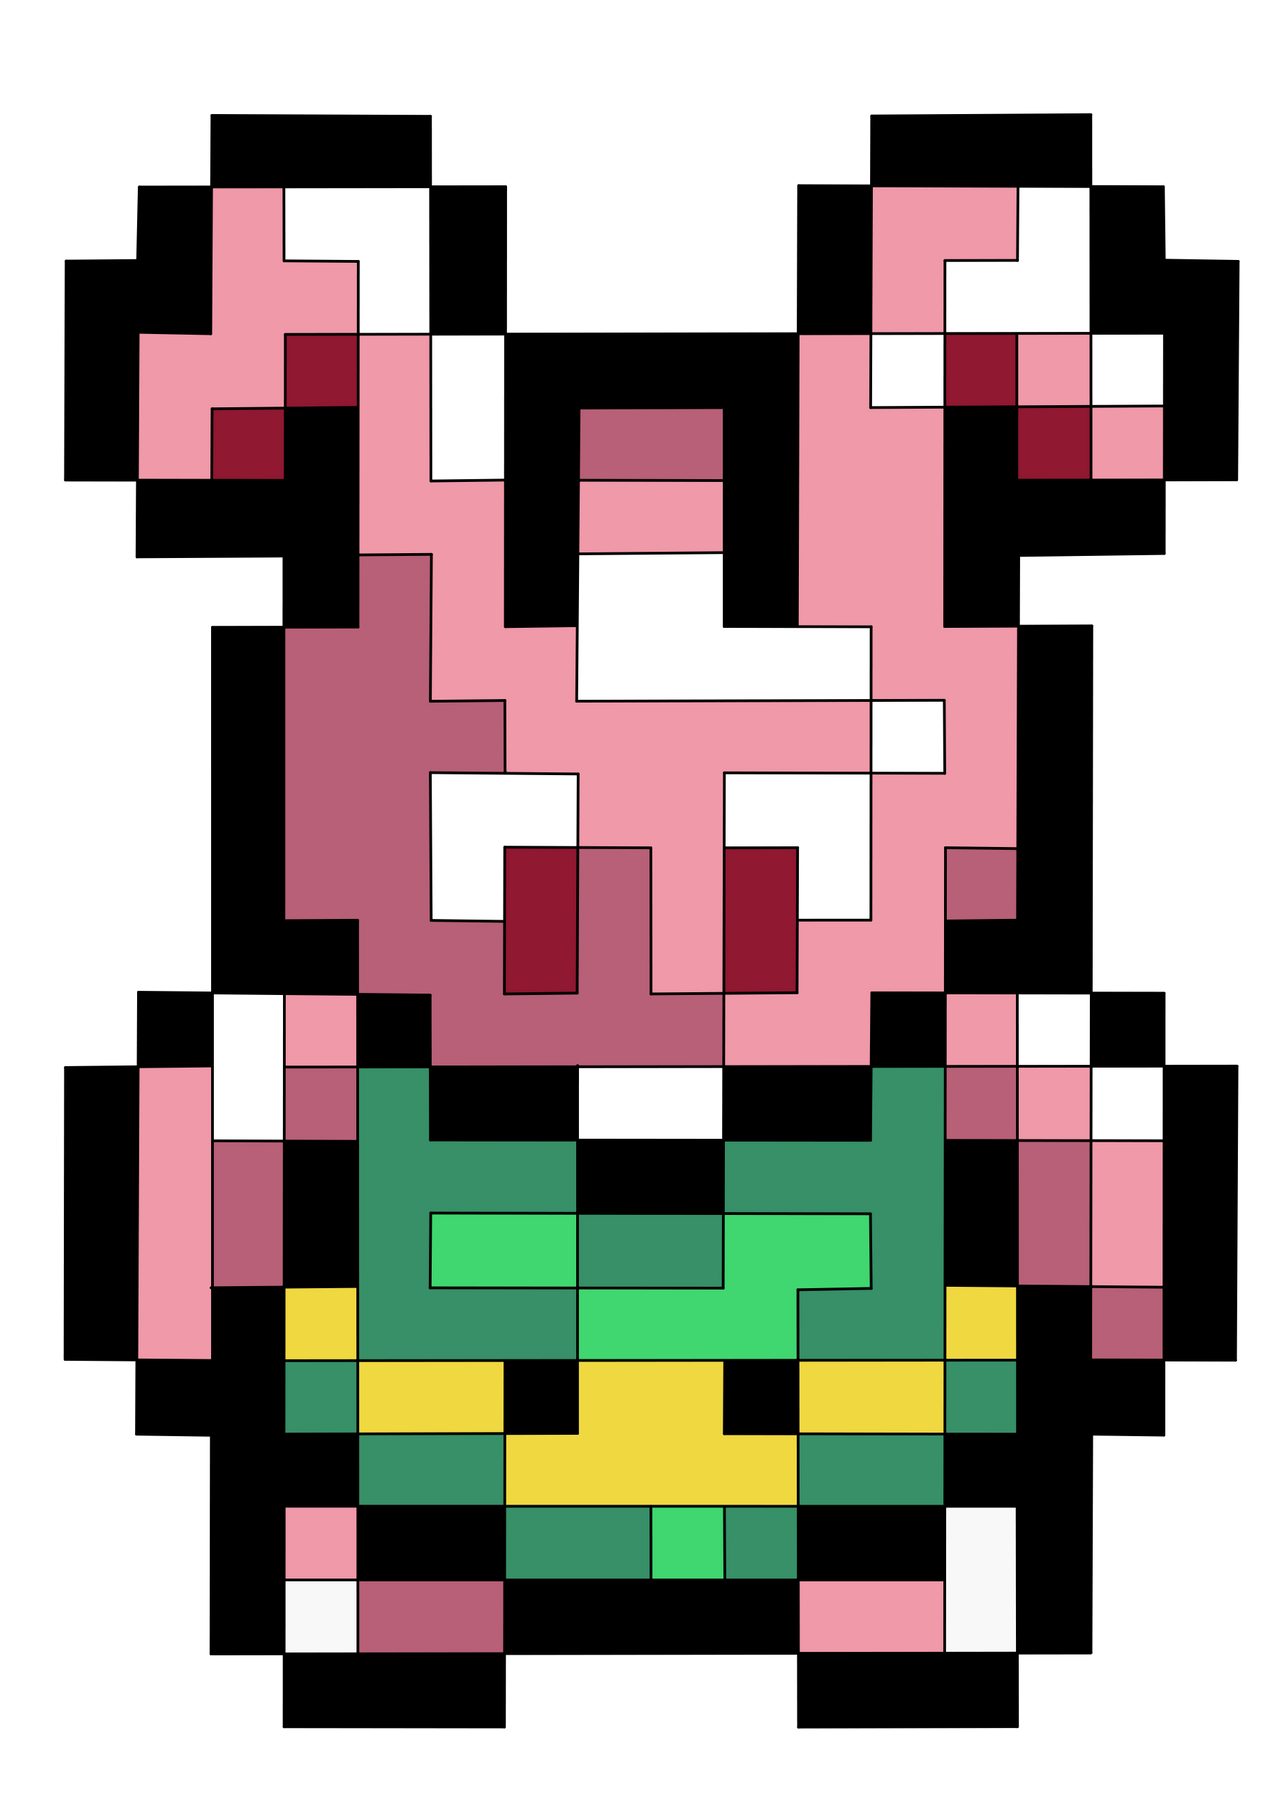 bunny_link_by_captainedwardteague_depv0h3-fullview.png